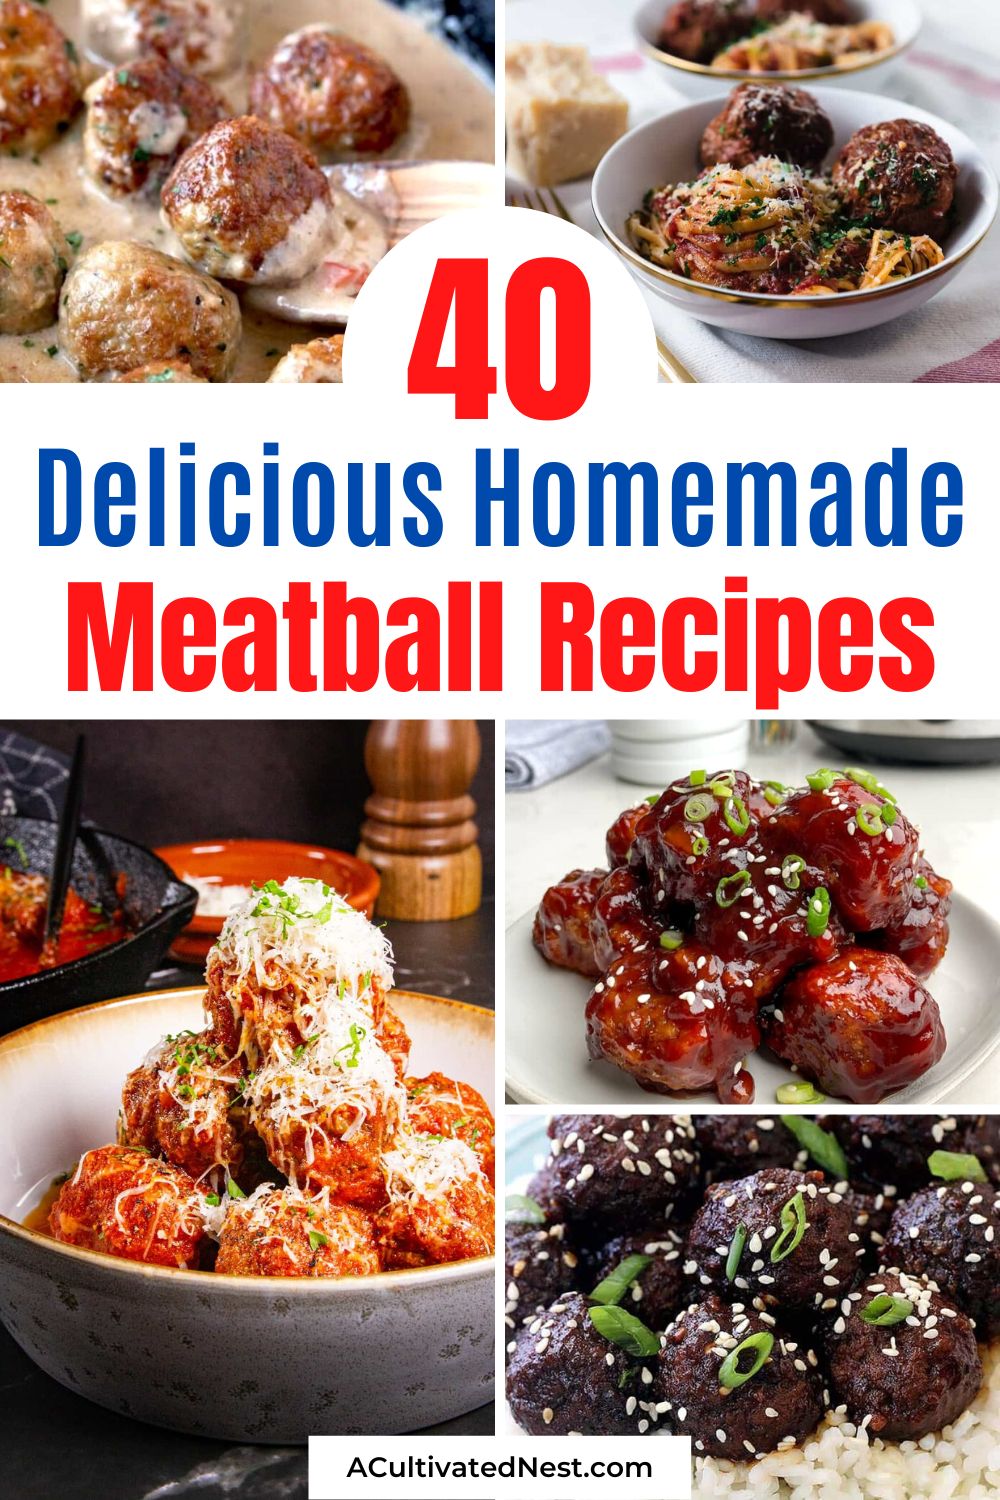 40 Delicious Meatball Recipes You Must Try- Are you tired of dry, flavorless meatballs? Then you need to checkout these delicious meatball recipes! These homemade meatballs are moist and full of flavor! | chicken meatballs, turkey meatballs, beef meatballs, #recipes #meatballRecipes #recipeIdeas #dinnerIdeas #ACultivatedNest